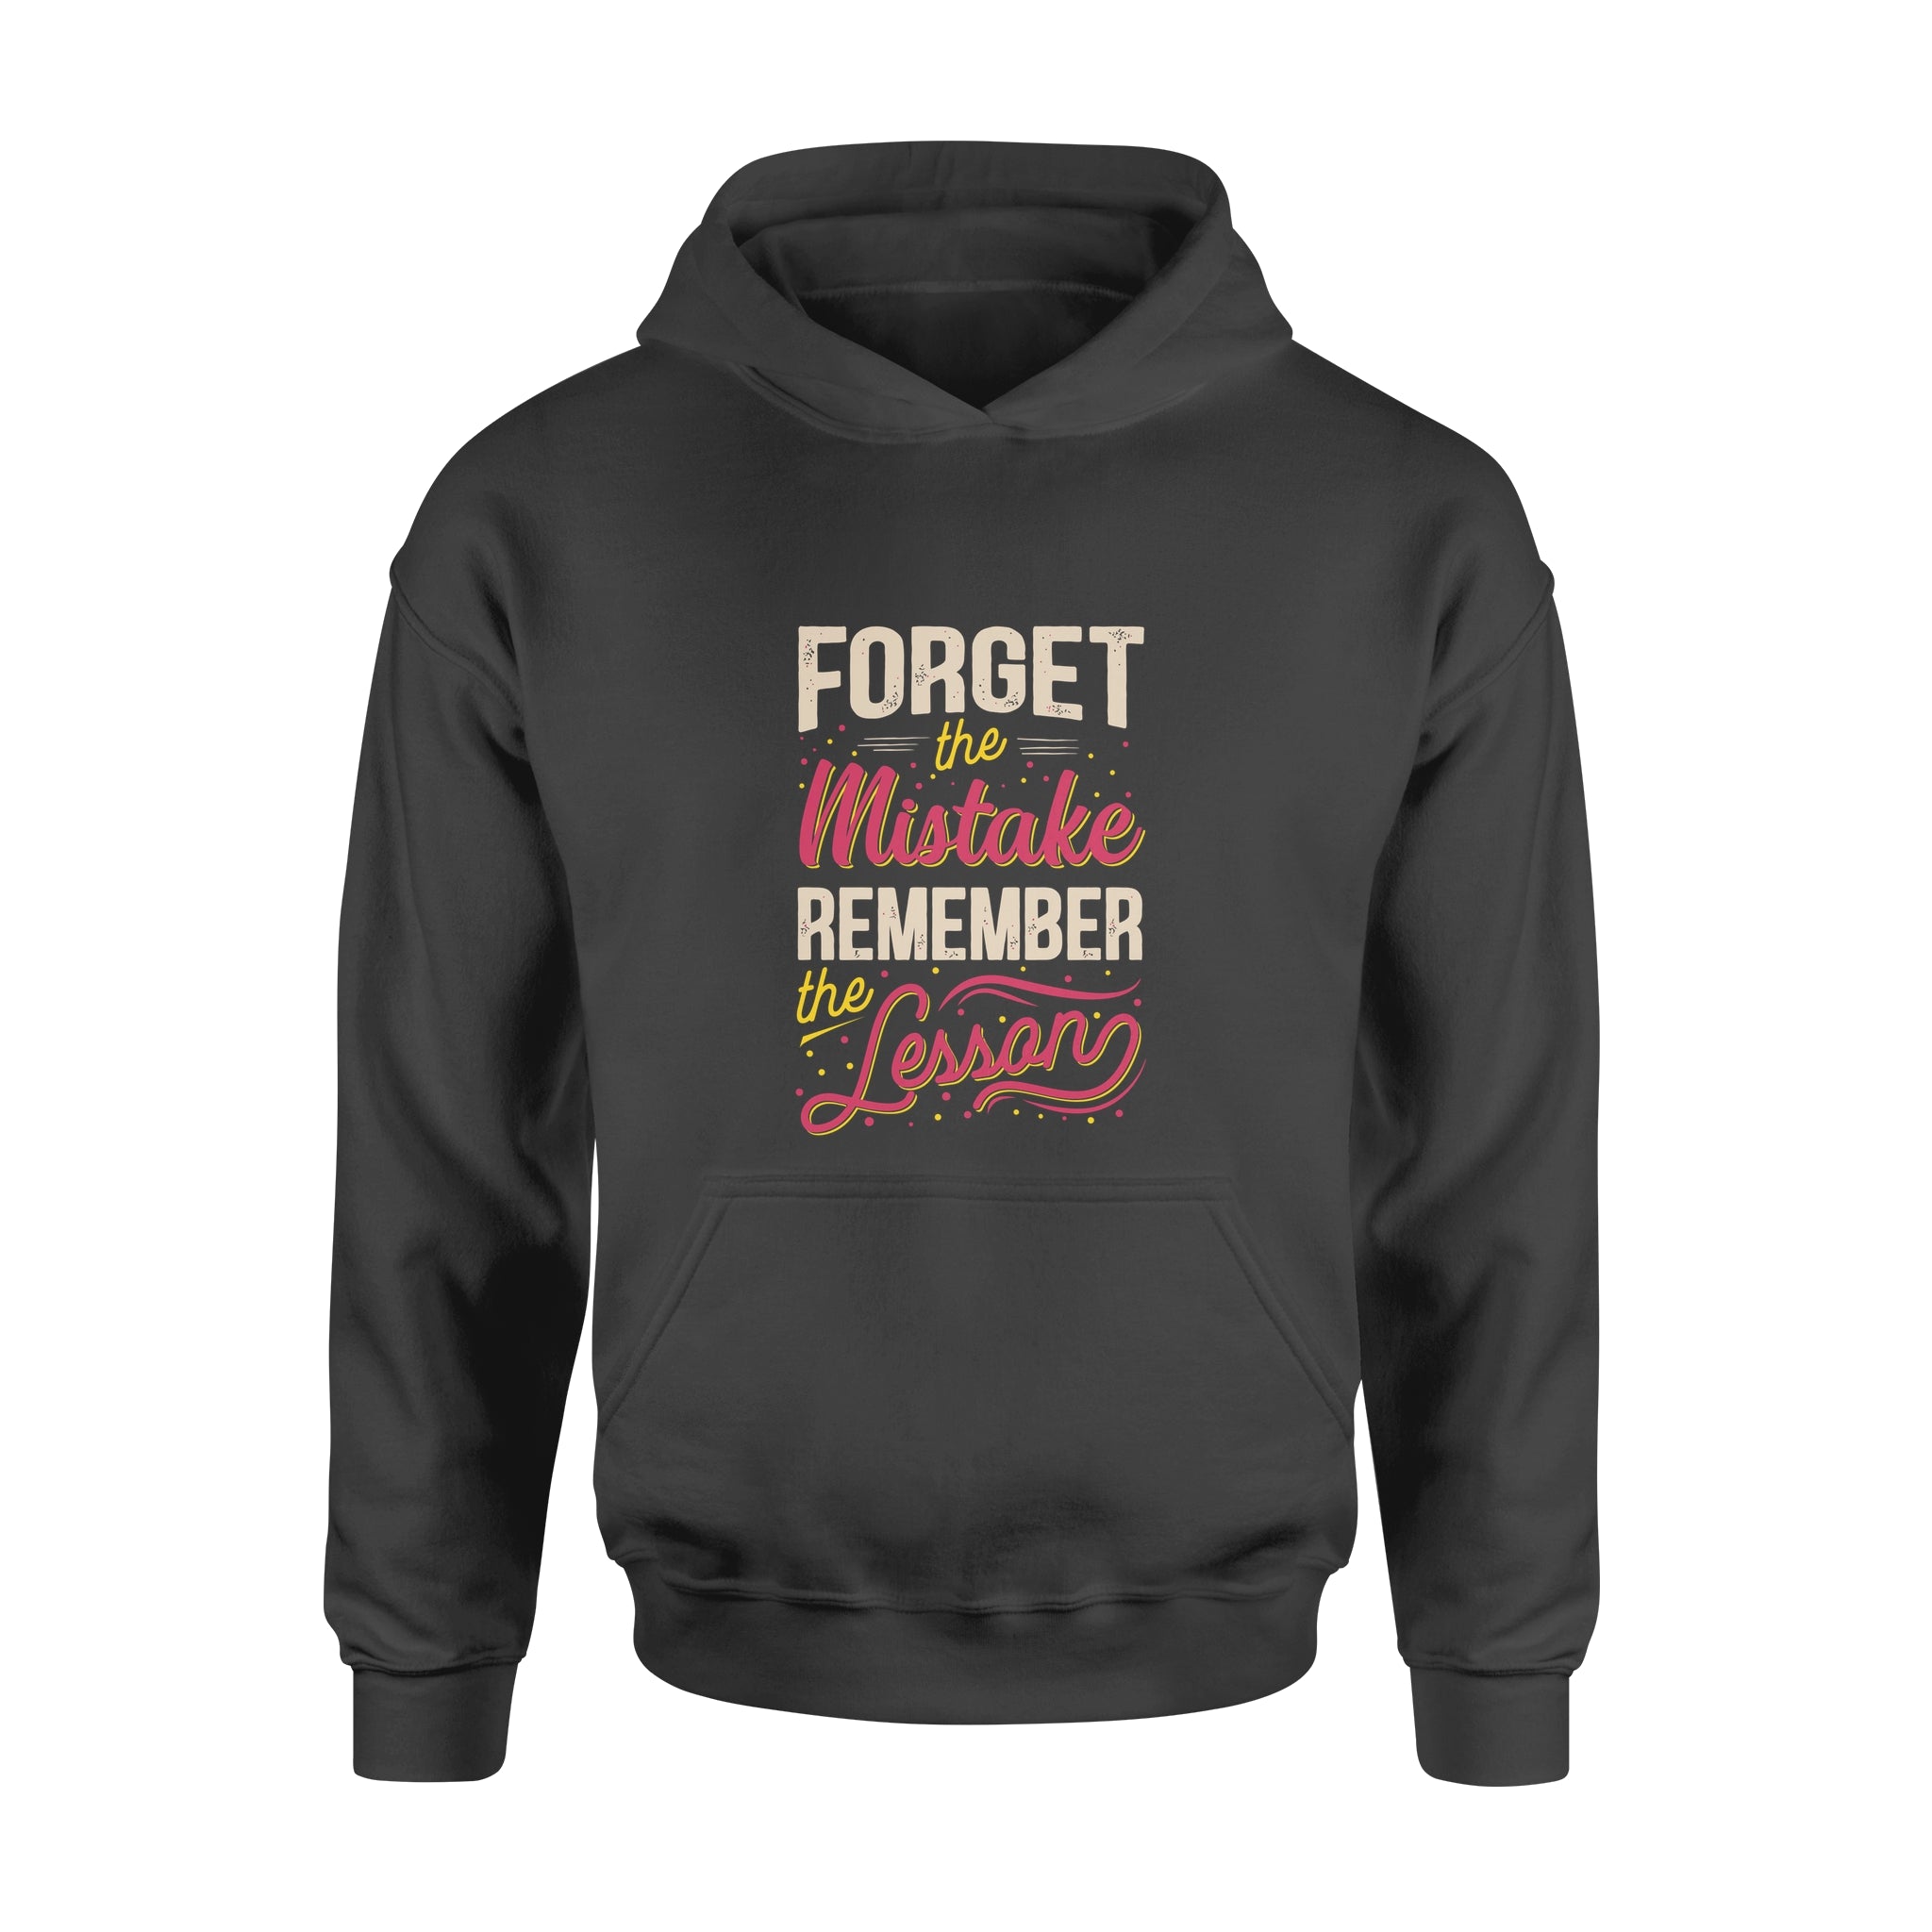 Forget The Mistake Remember The Lesson - Hoodie